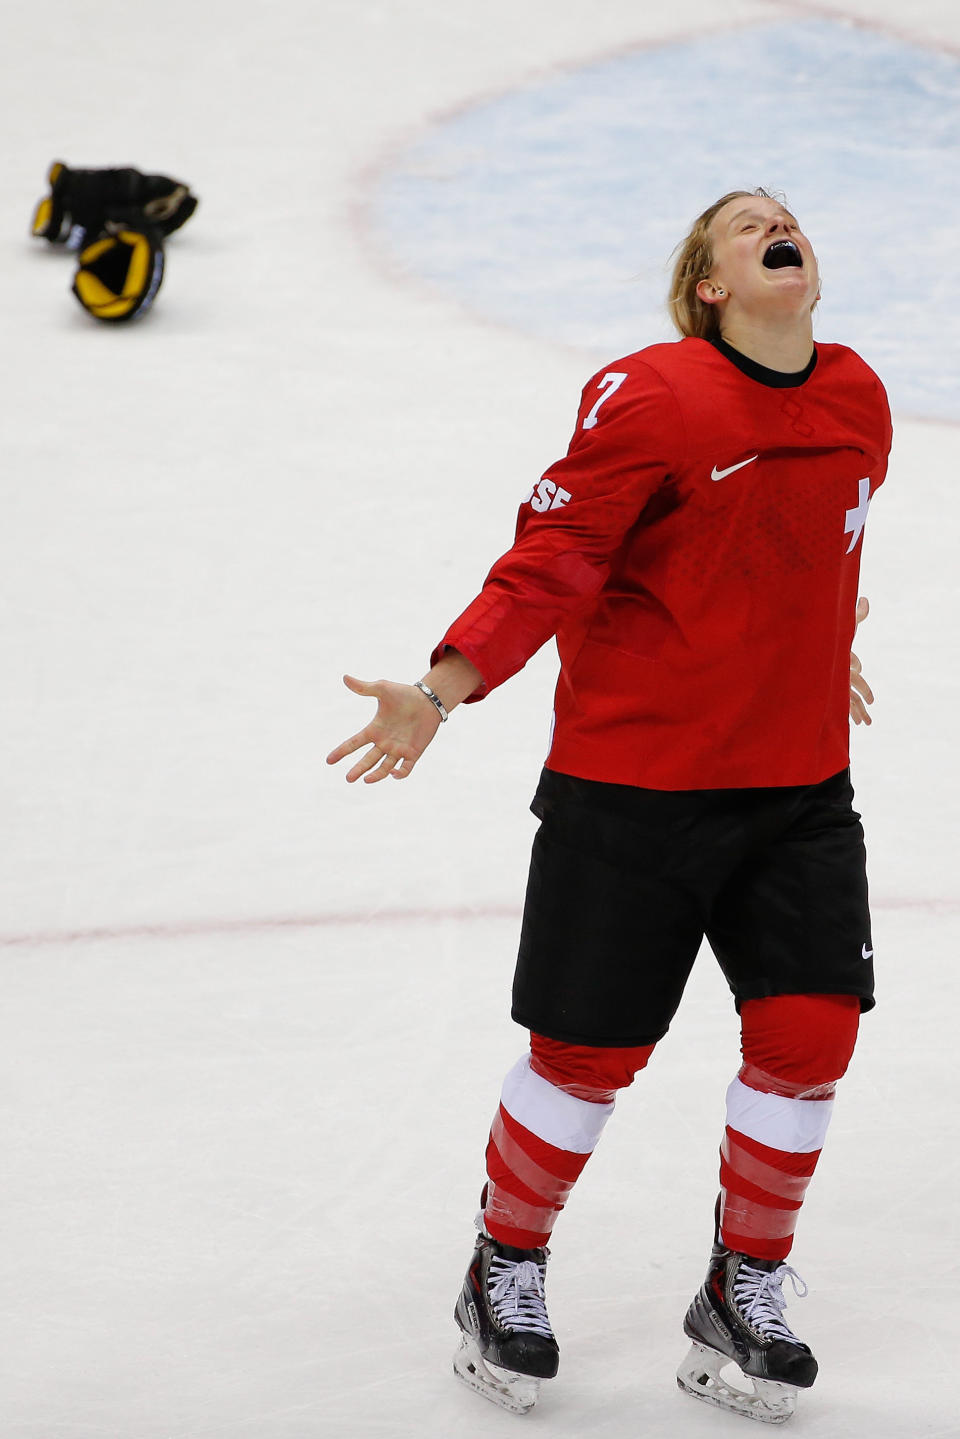 Lara Stalder of Switzerland celebrates her team's 4-3 win over Sweden in the women's bronze medal ice hockey game at the 2014 Winter Olympics, Feb. 20, 2014, in Sochi, Russia.